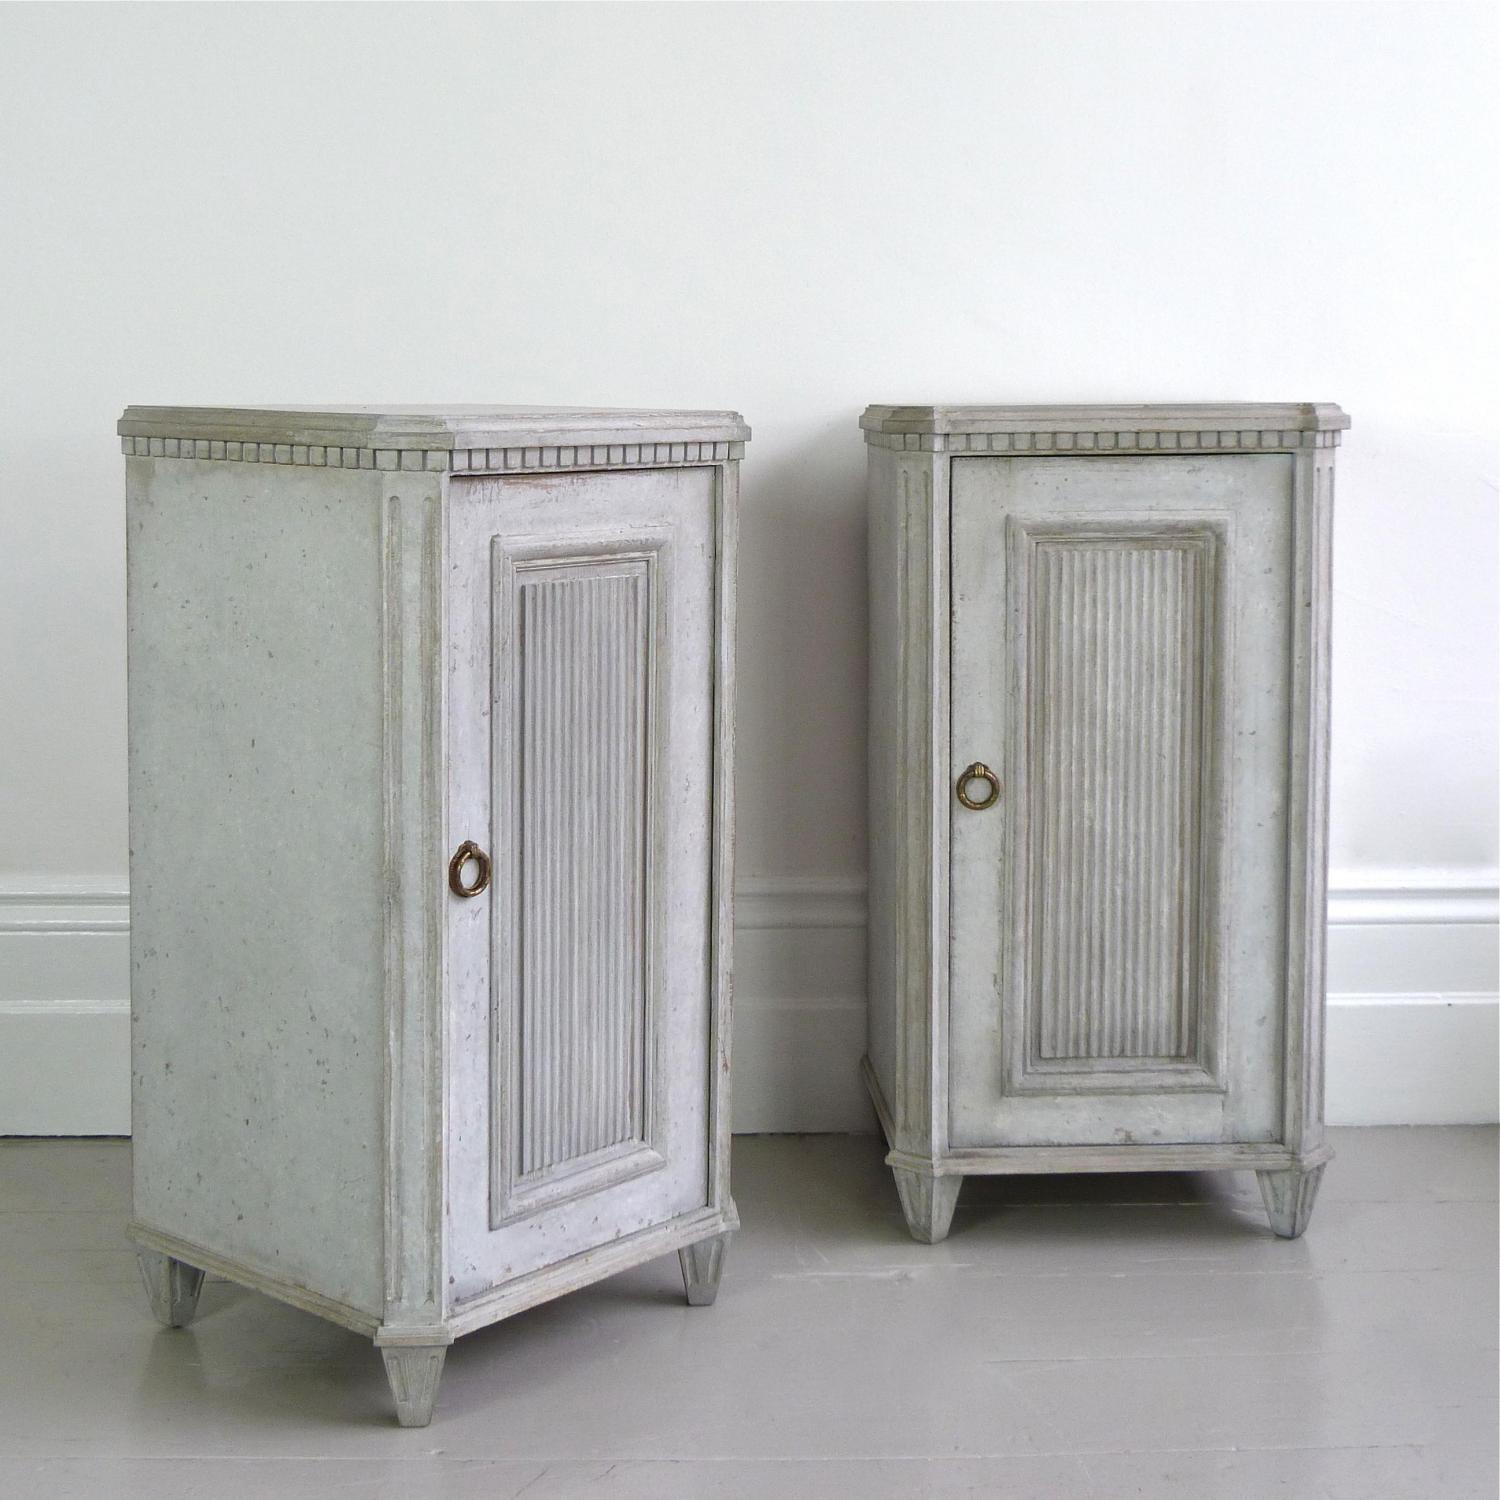 PAIR OF SWEDISH GUSTAVIAN STYLE BEDSIDES